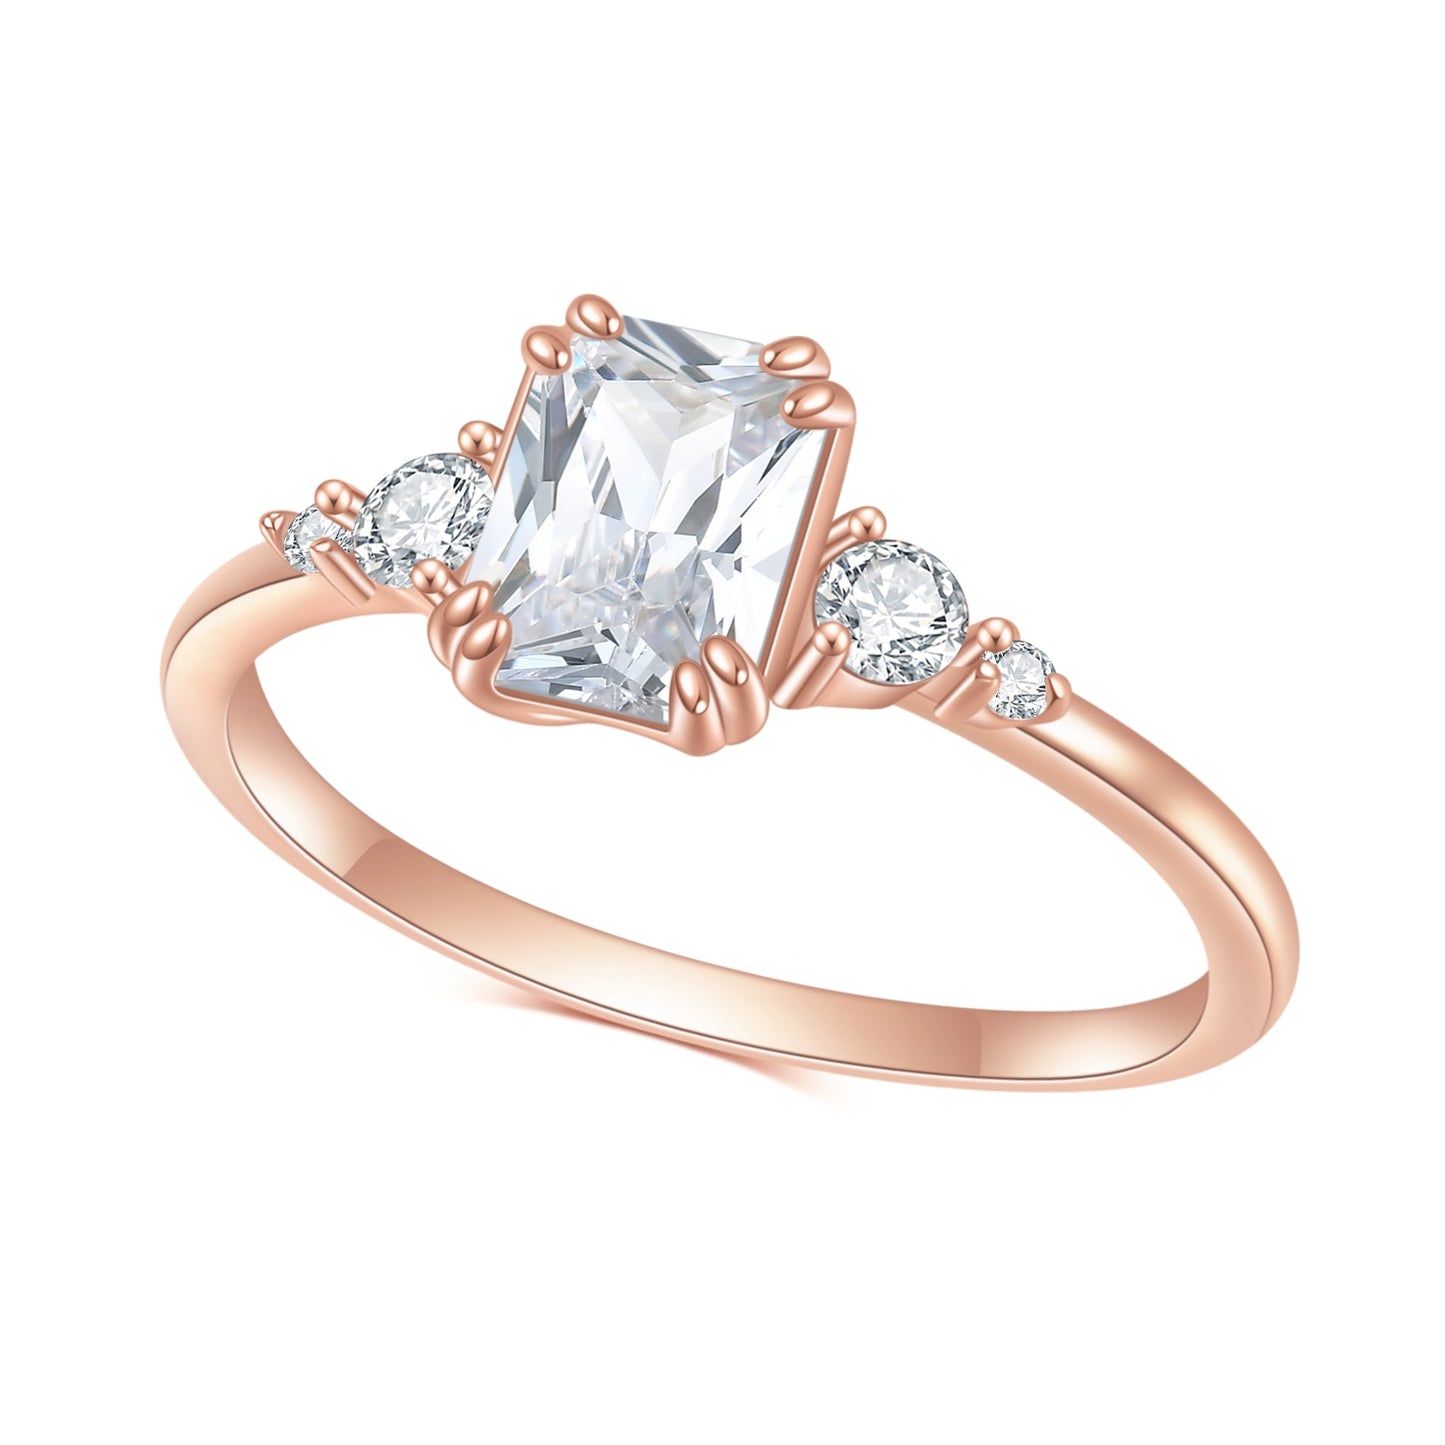 A rose gold ring set with a radiant cut moissanite with zircons on both sides.